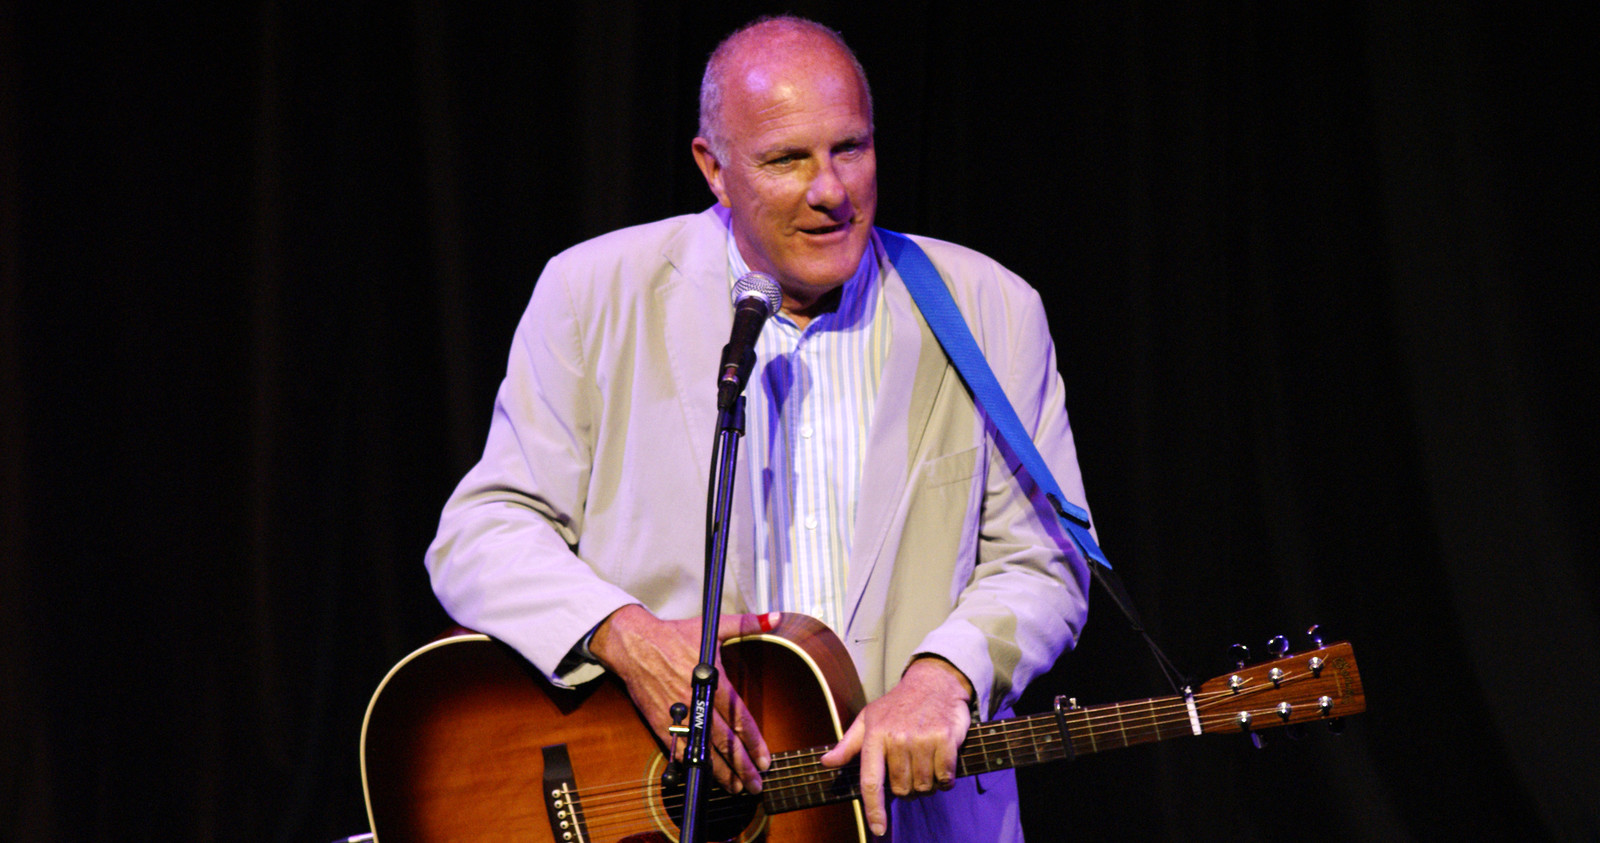 Richard Digance with special guest Eric Sedge at Bristol Folk House